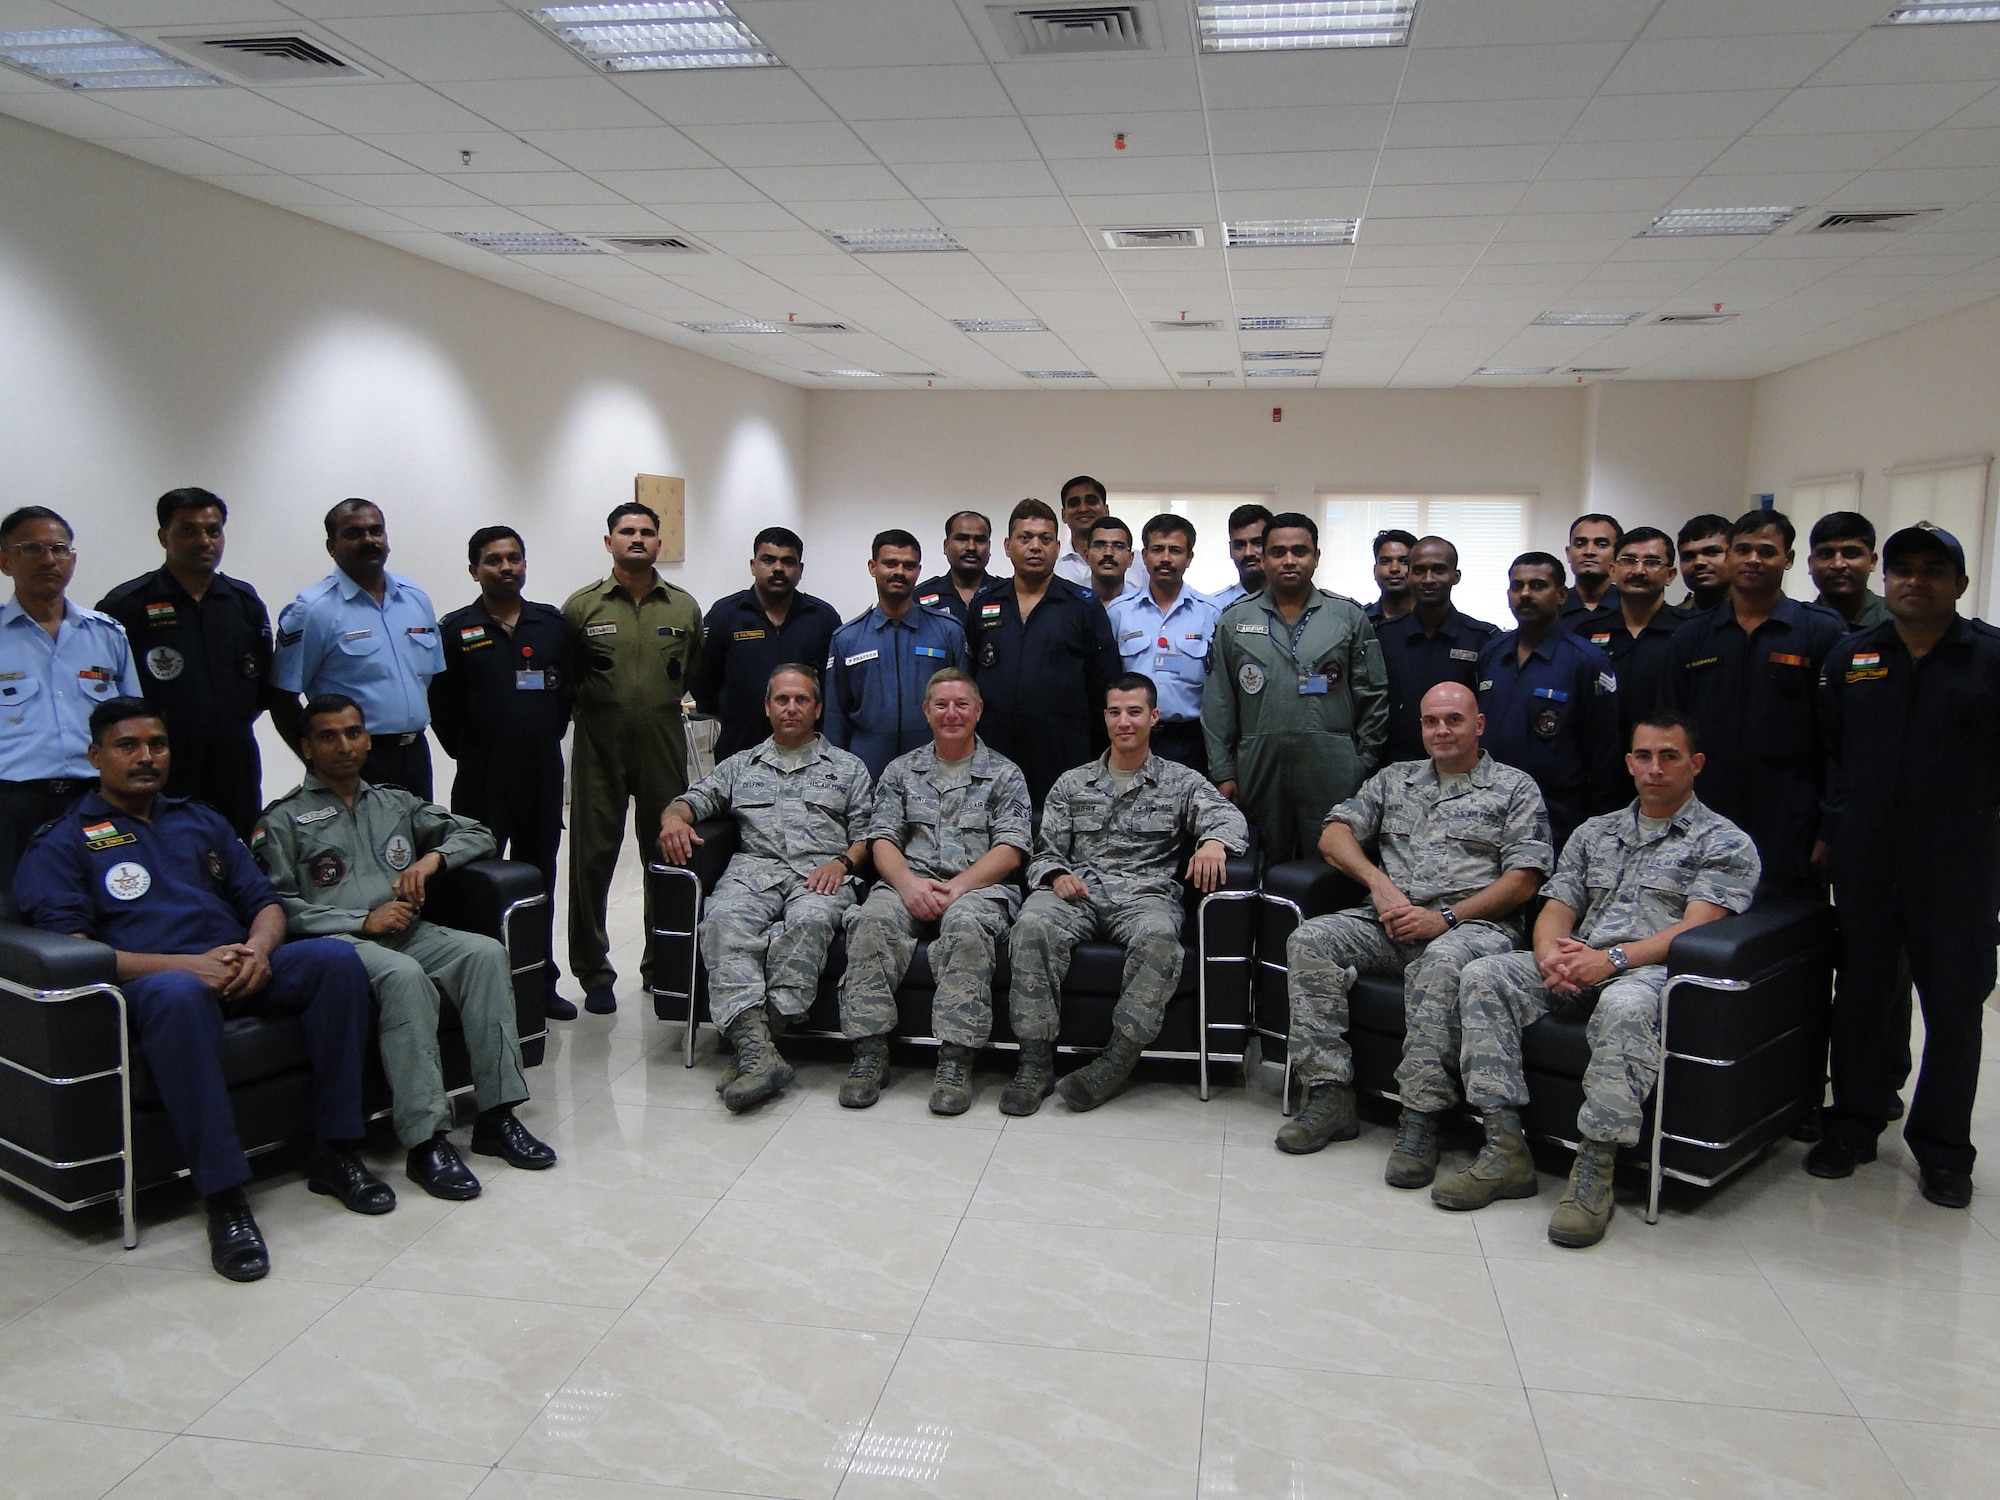 Master Sergeant Joe Delfino, Technical Sergeant Kevin Hunt, Staff Sergeant Matt Elderkin, Chief Master Sergeant Carlos Moniz and Captain Chris Peloso, all of the 143d Maintenance Group and members of the Mobile Training Team for the Indian Air Force, pose with some of their students. Provided photo.